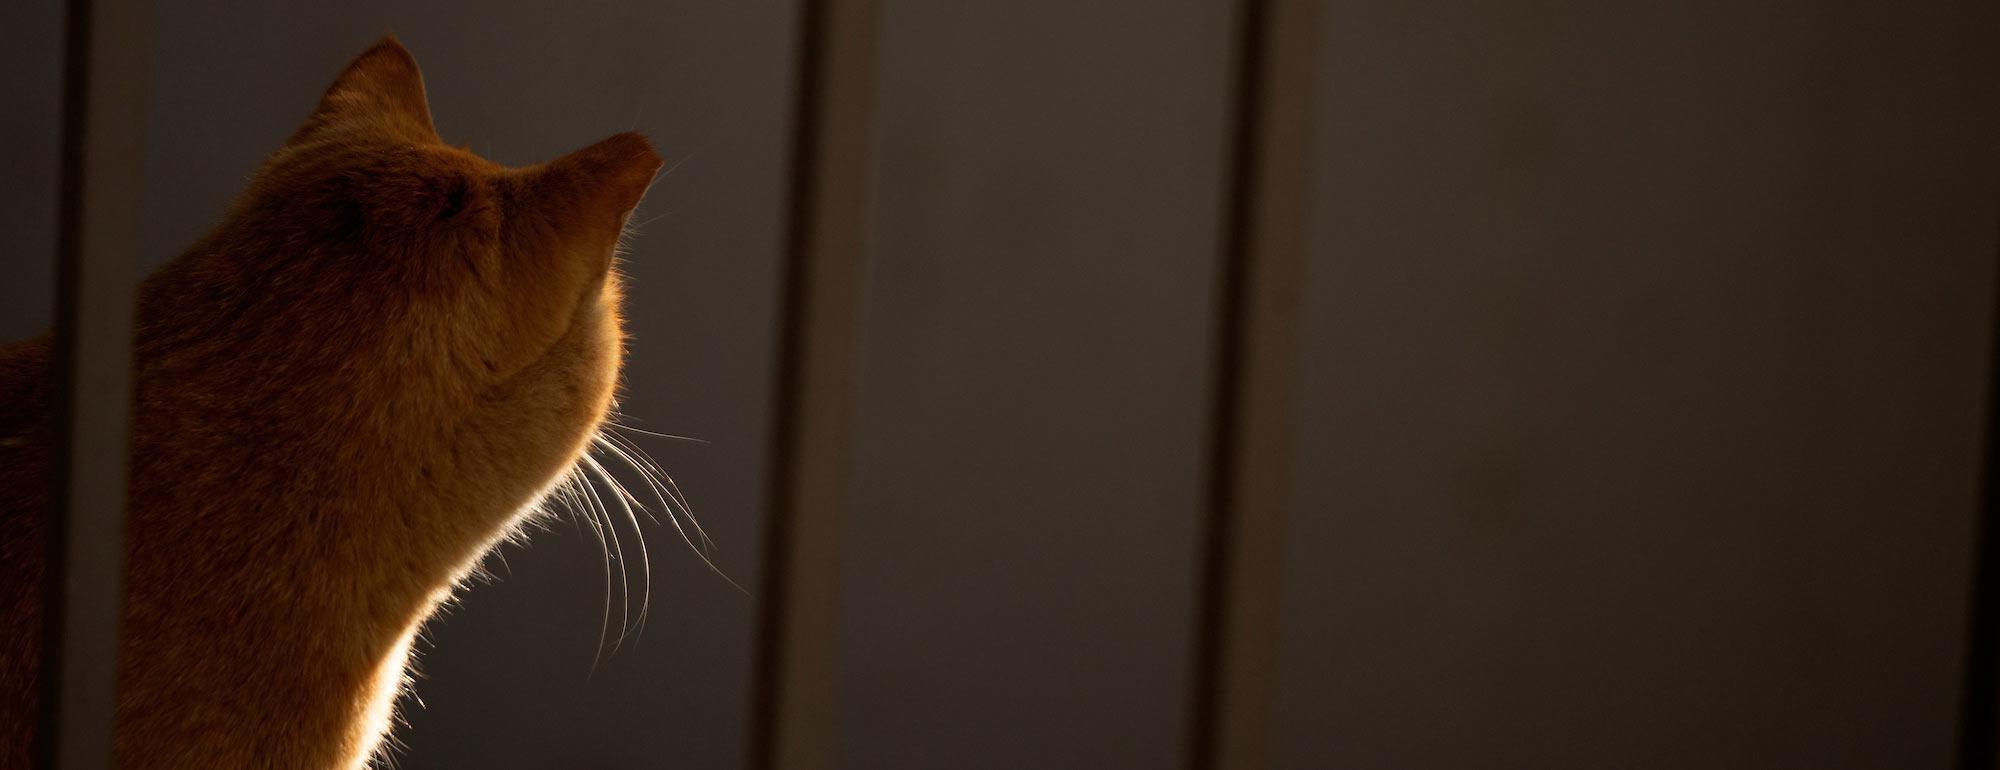 A view of a cat from the side with its fur catching the light